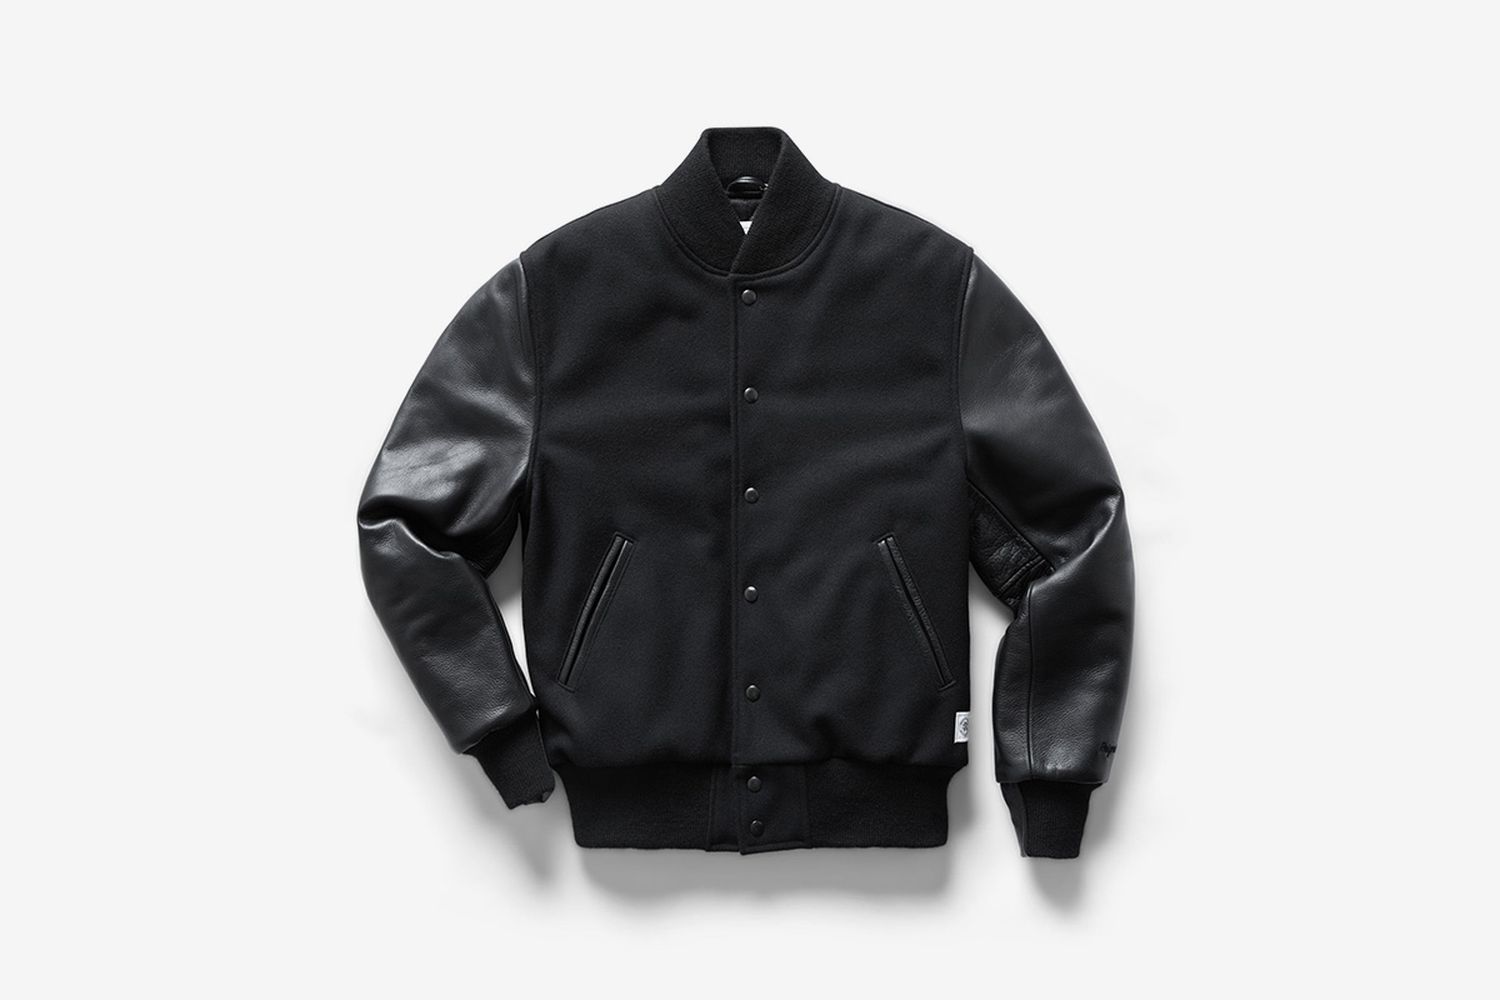 Bomber Jackets: 10 of the Best to Buy in 2022